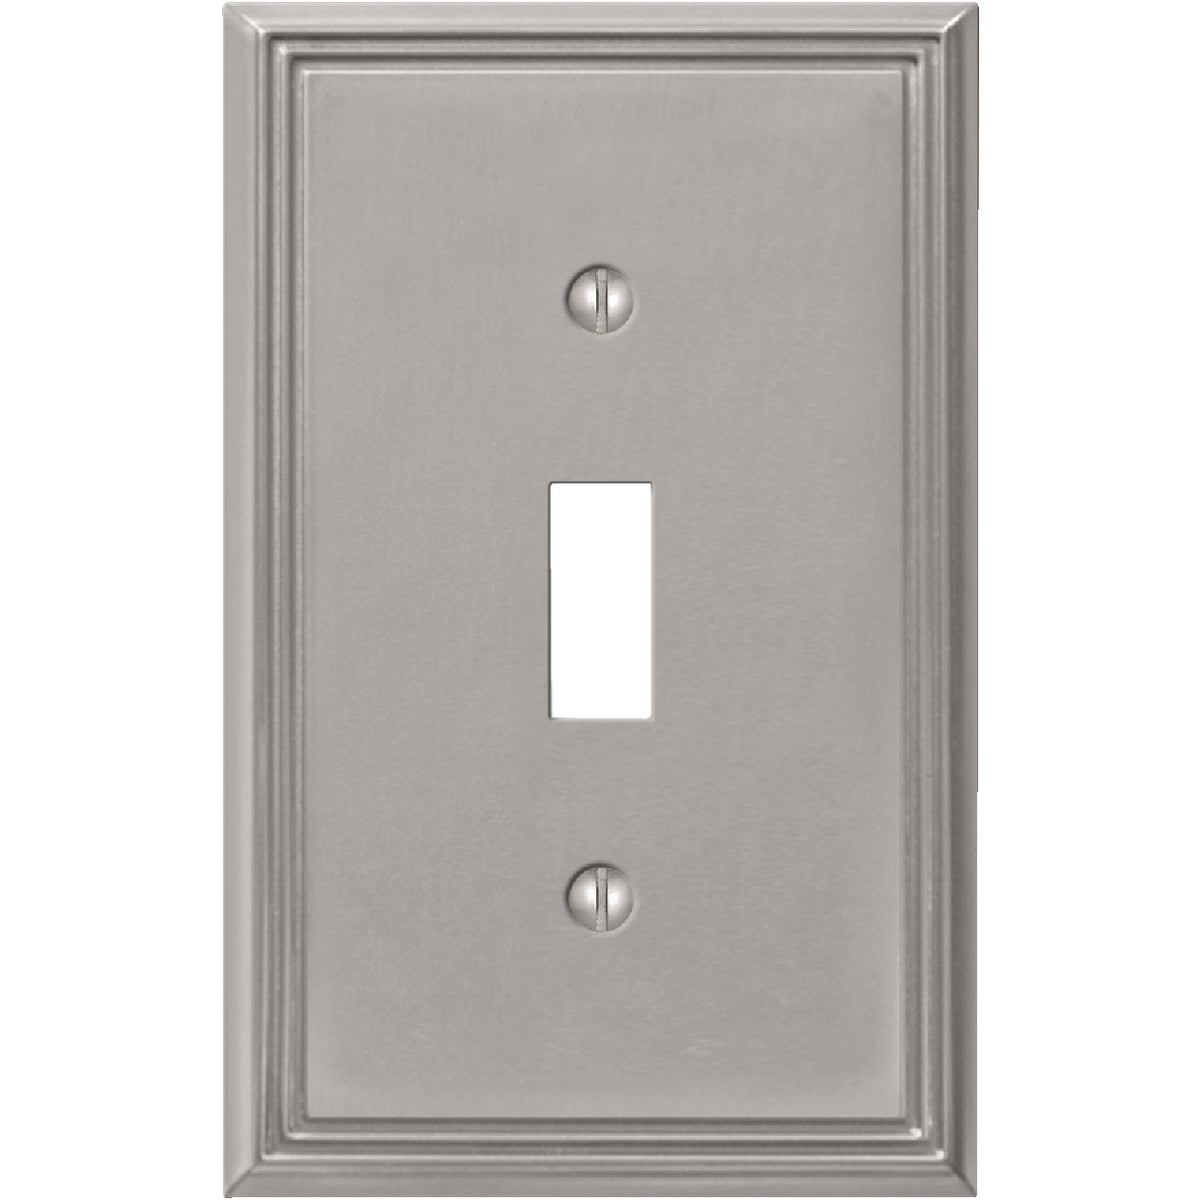 Item 511379, Metro Line cast metal, toggle switch wall plate.